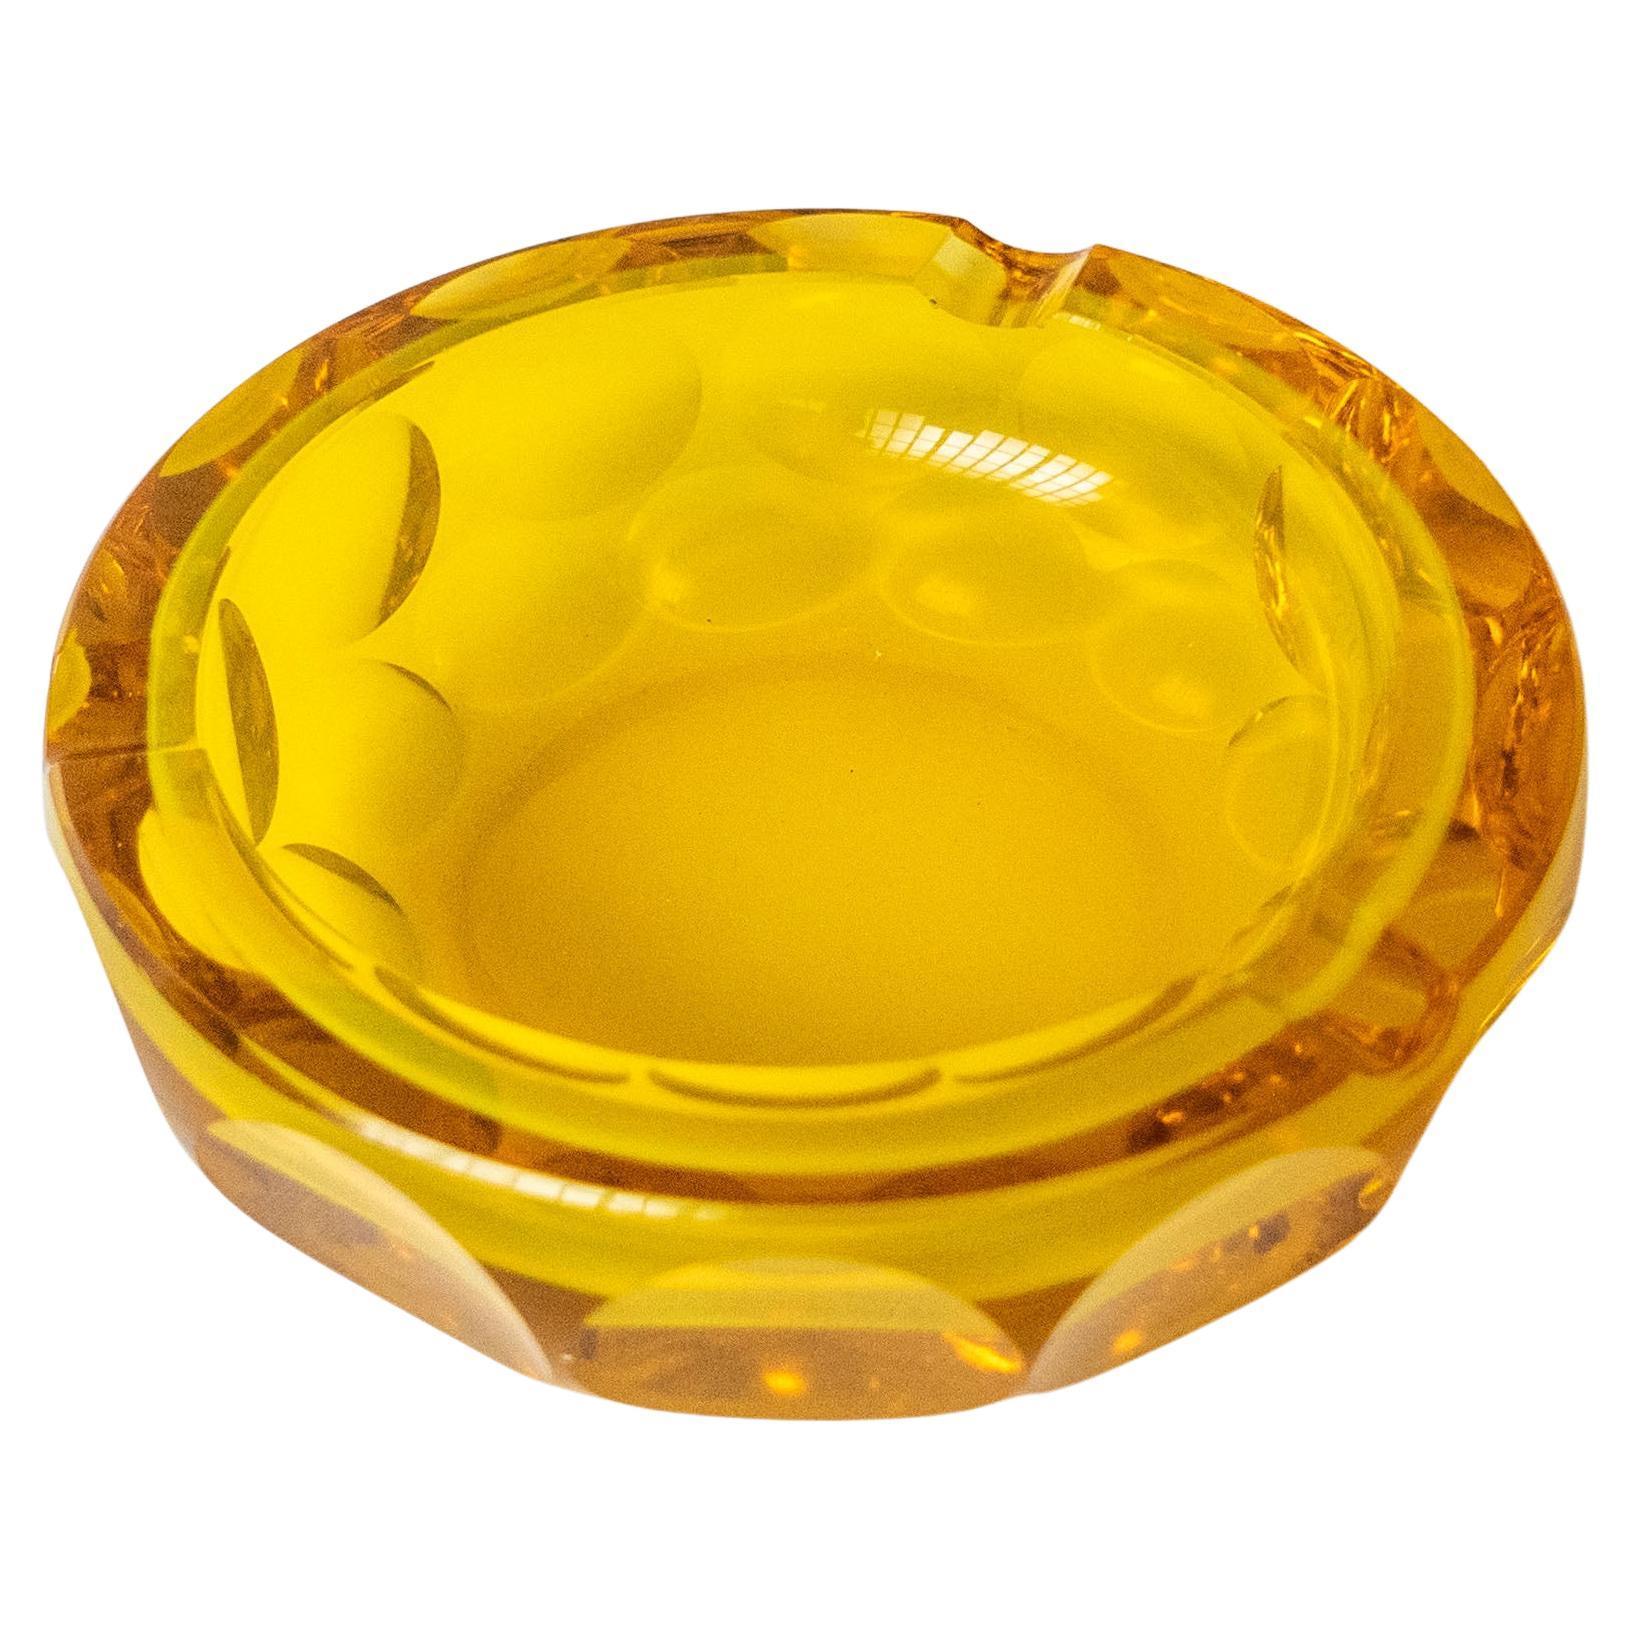 Decorative glass bowl, yellow with dots